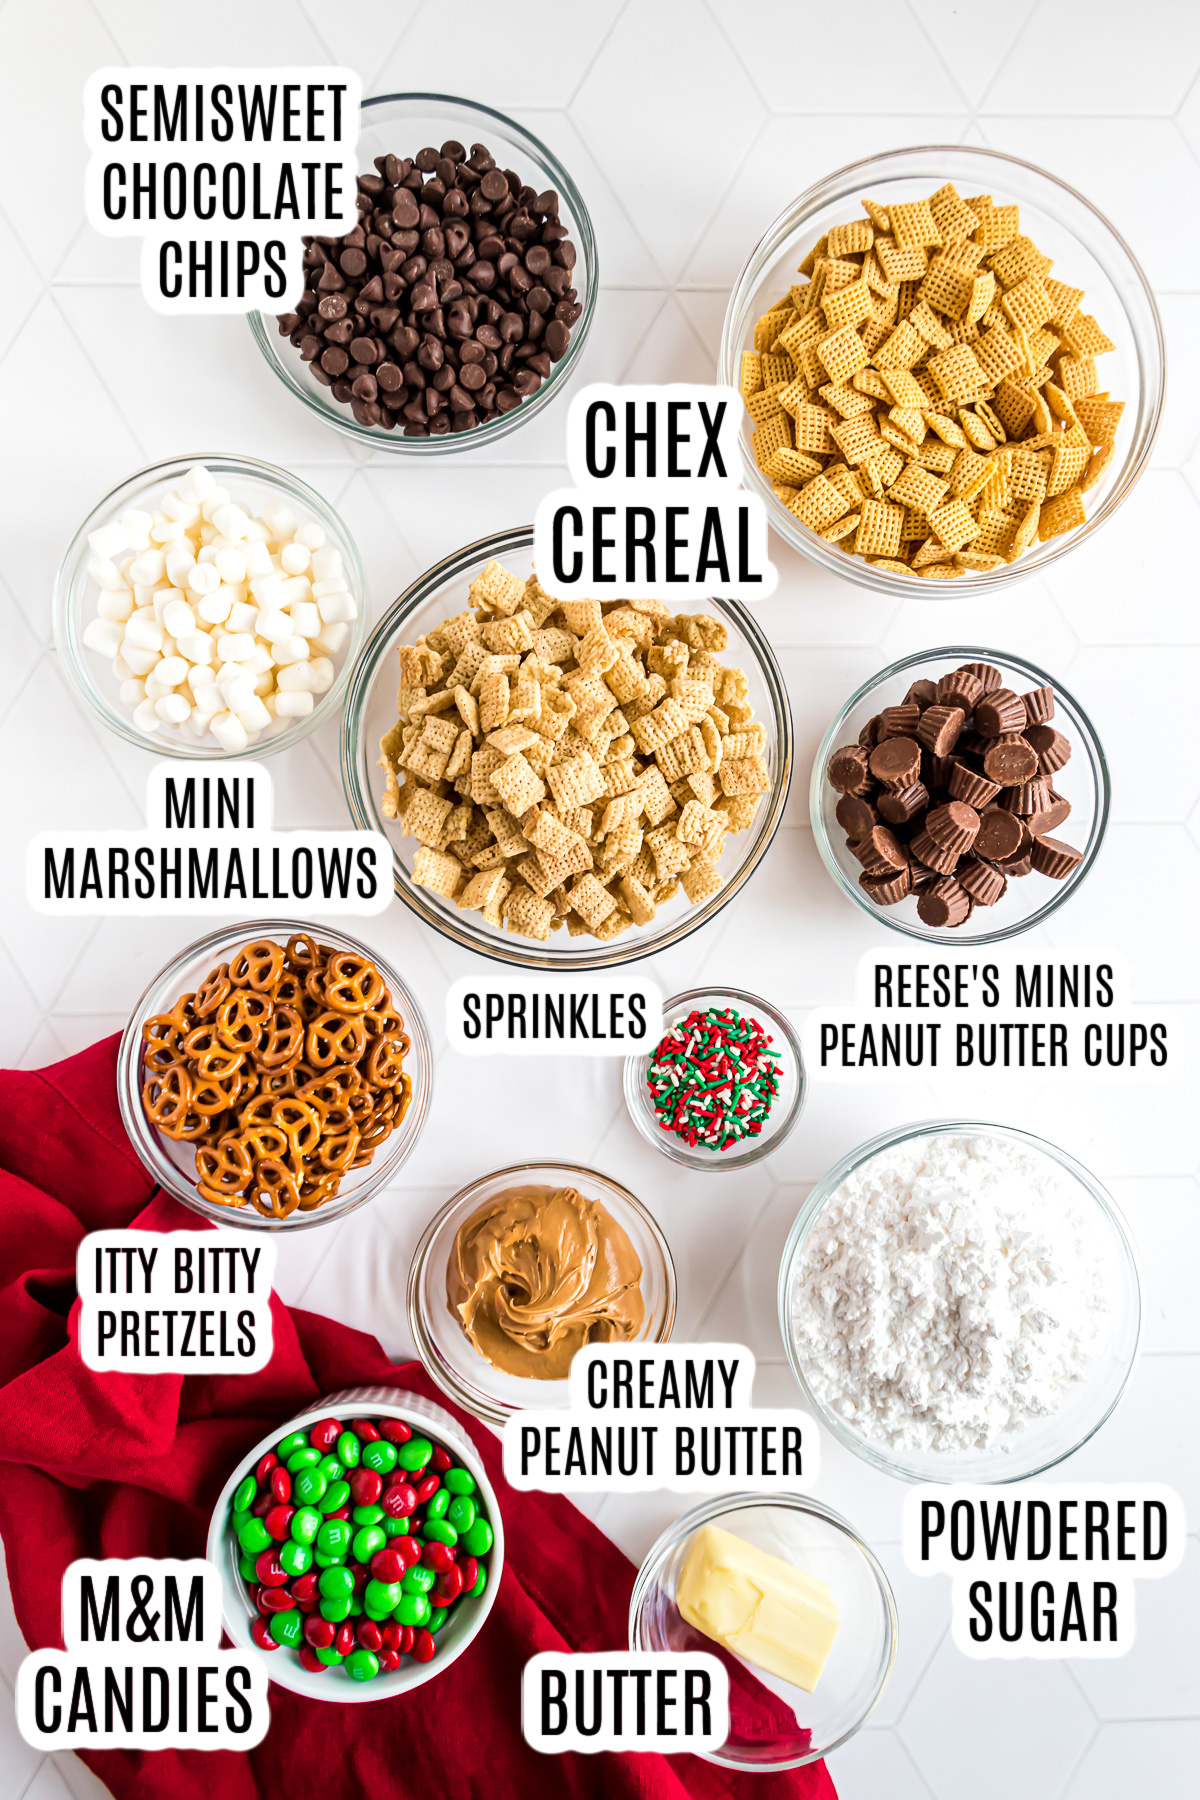 All the ingredients needed to make the Christmas Reindeer Chex Mix Recipe including: Chex cereal, semisweet chocolate chips, mini marshmallows, holiday sprinkles, Reese's Minis peanut butter cups, pretzels, creamy peanut butter, powdered sugar, red and green m&m candies, and butter.